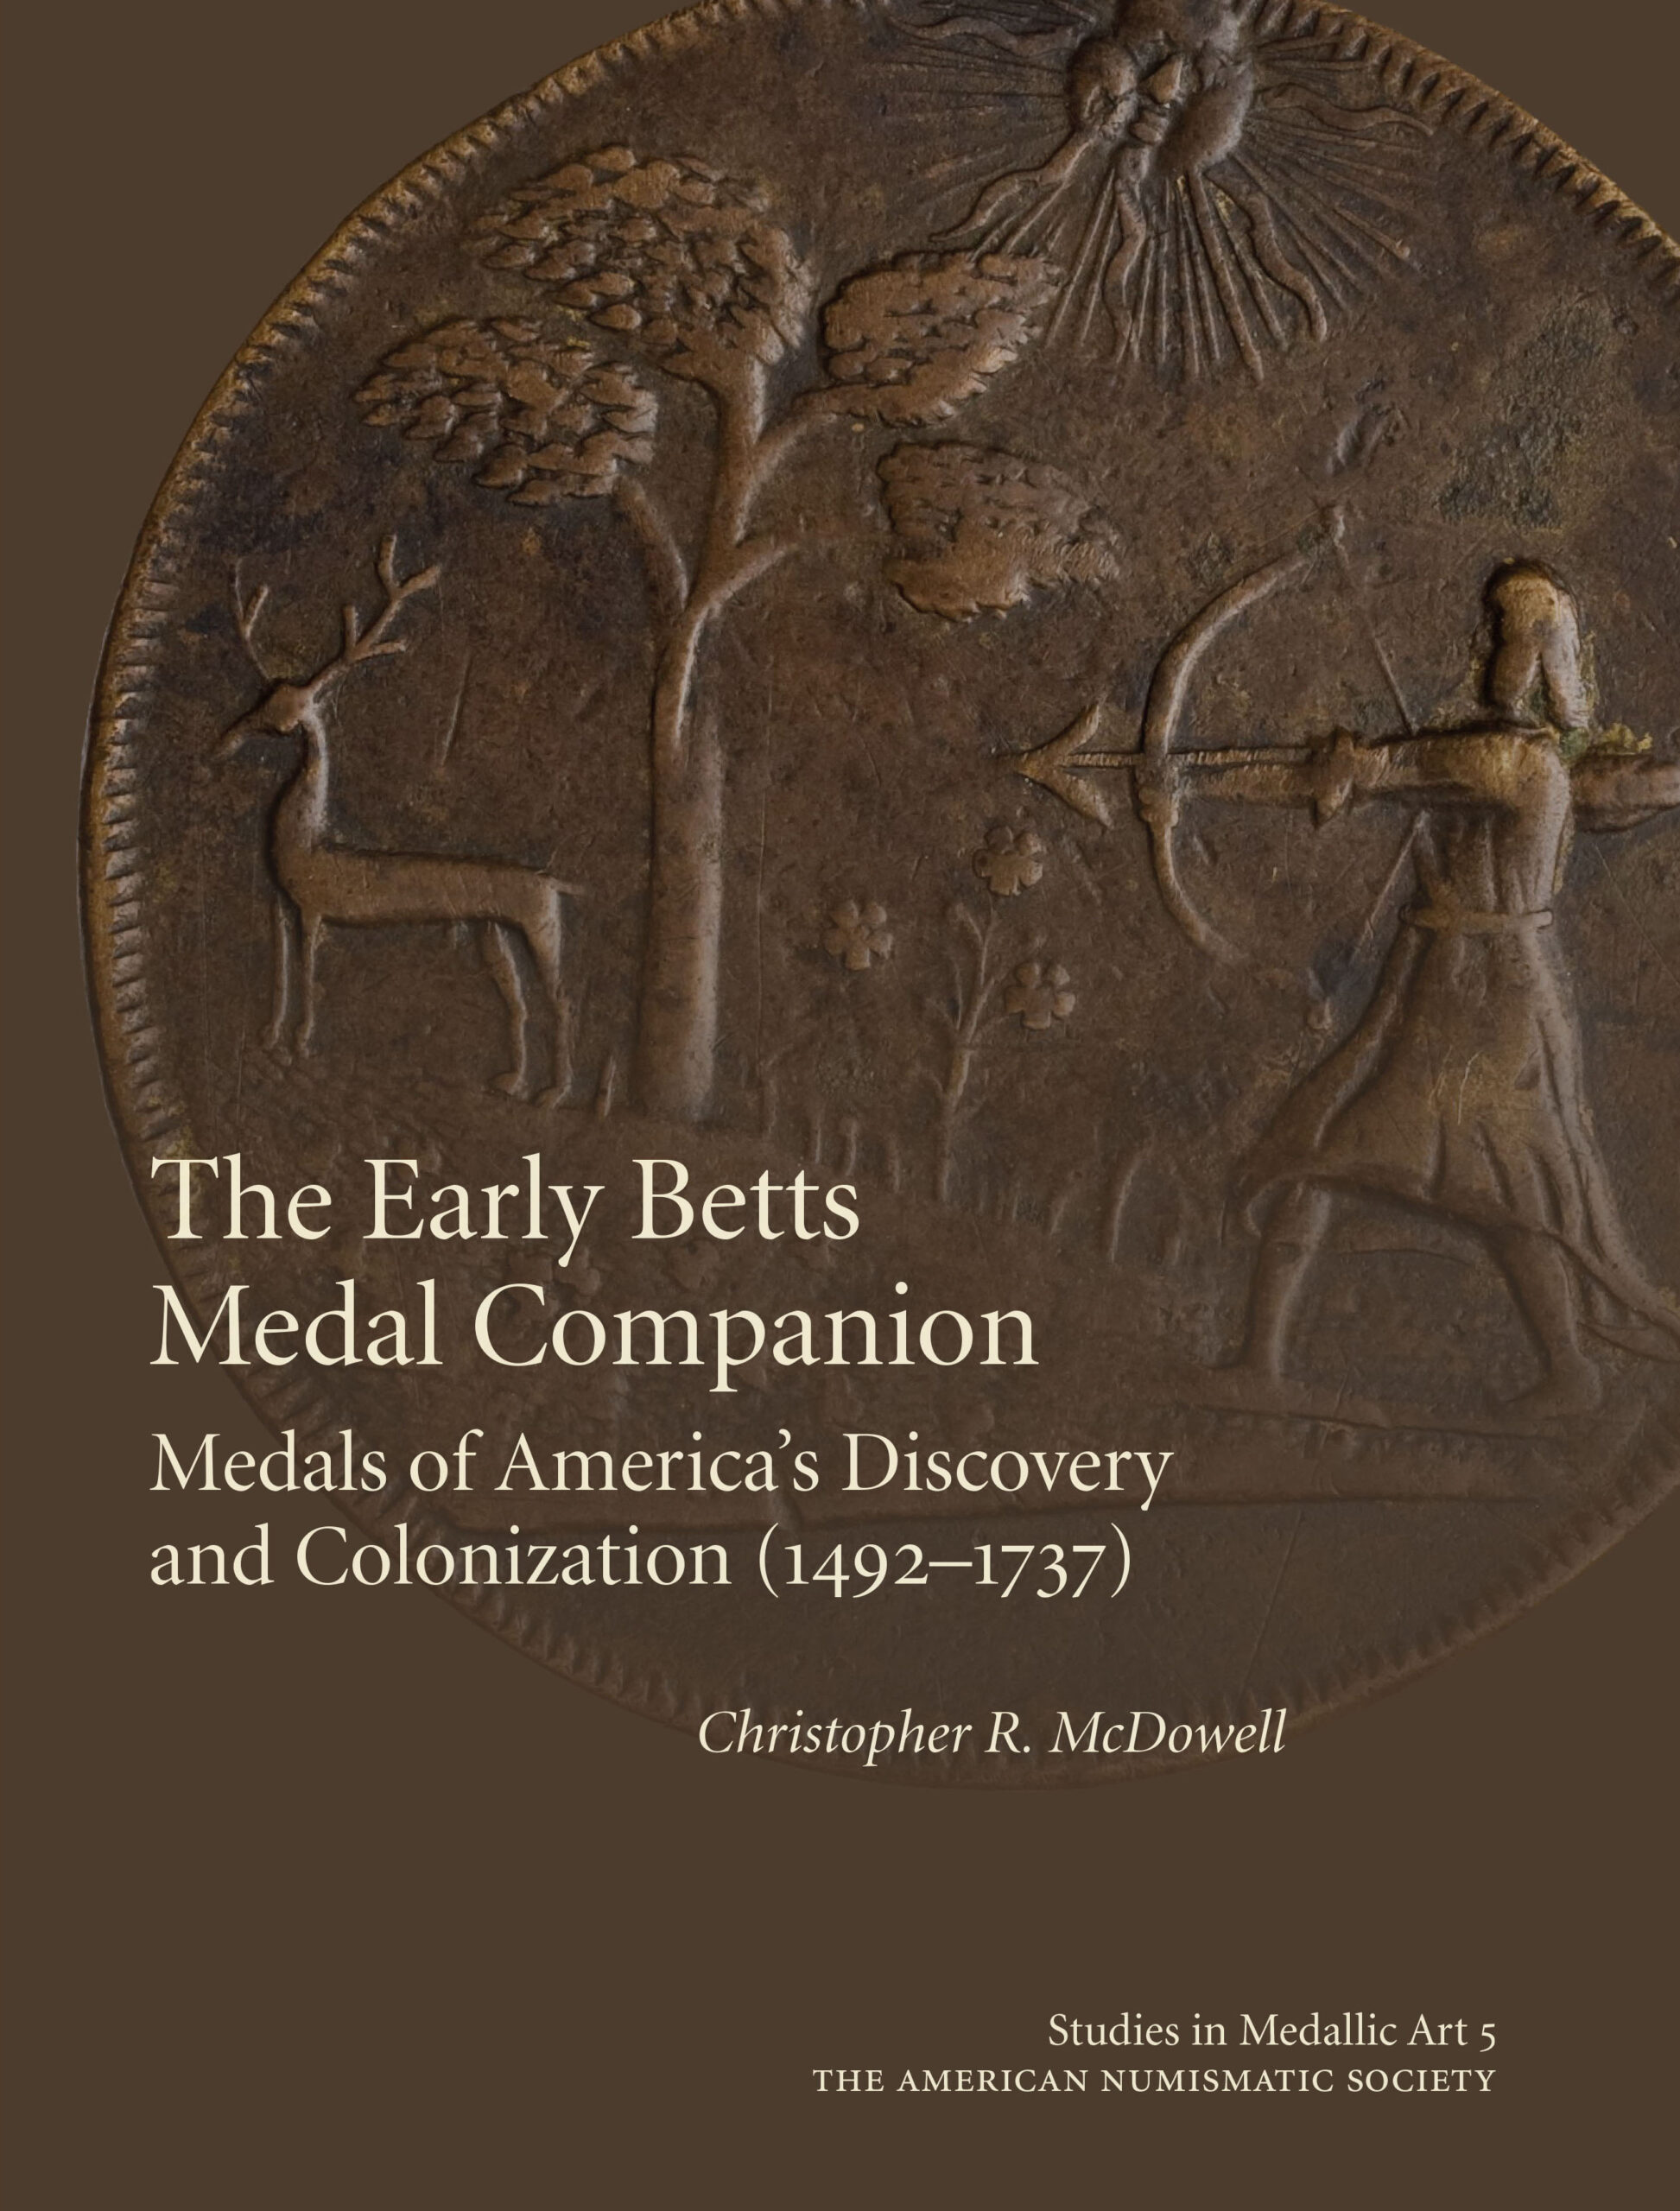 The Early Betts Medal Companion: Medals of America’s Discovery and Colonization (1492–1737)